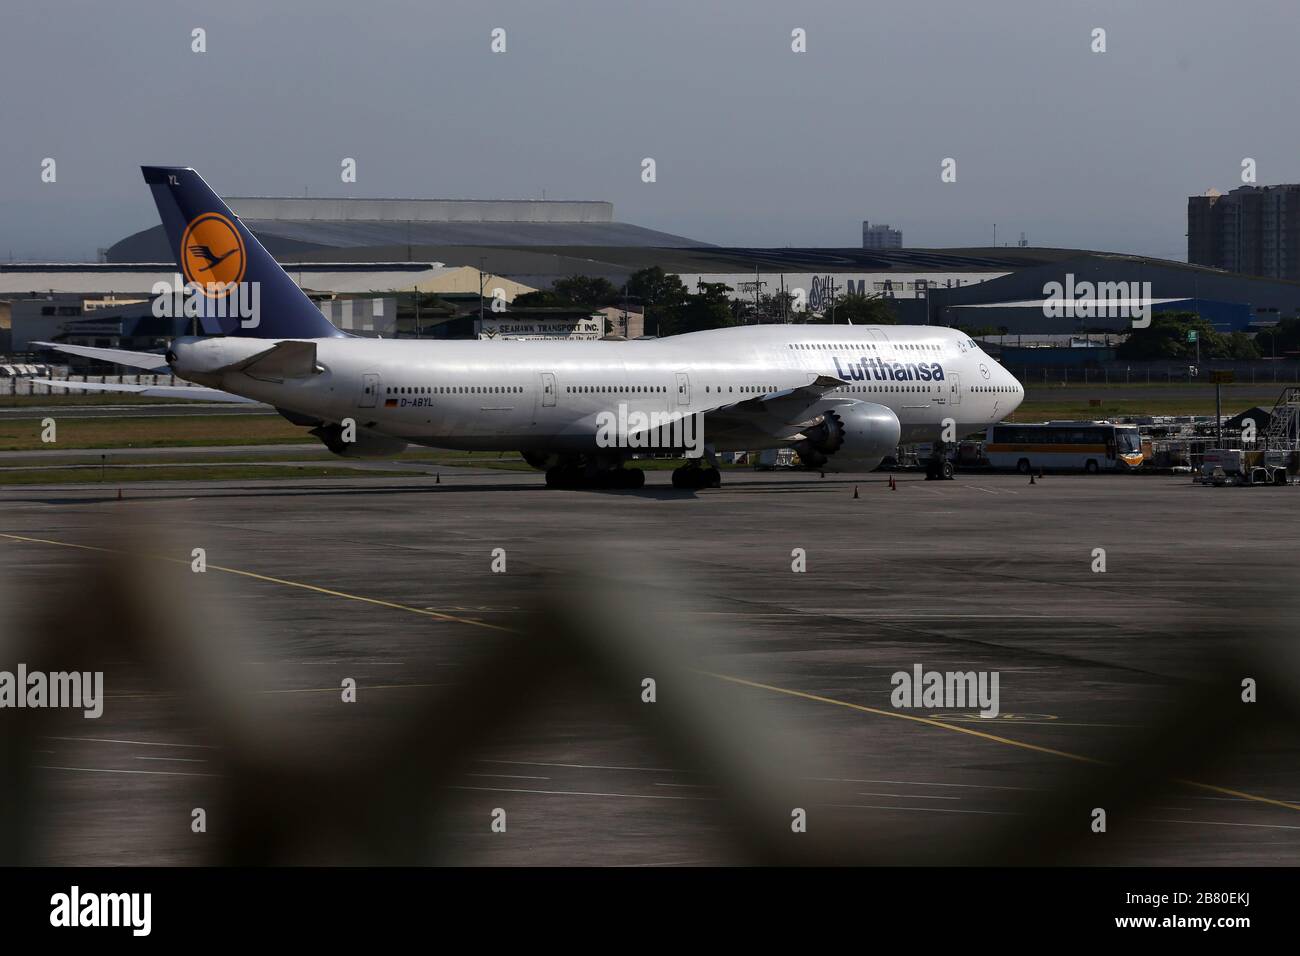 Manila, Philippines. 19th Mar, 2020. A Lufthansa plane is parked at the airport. More than 300 Germans are waiting at Ninoy Aquino International Airport for a Lufthansa flight chartered by the German Embassy in the Philippines because of the Covid 19 pandemic. Credit: Alejandro Ernesto//Alejandro Ernesto/DPA/Alamy Live News Stock Photo